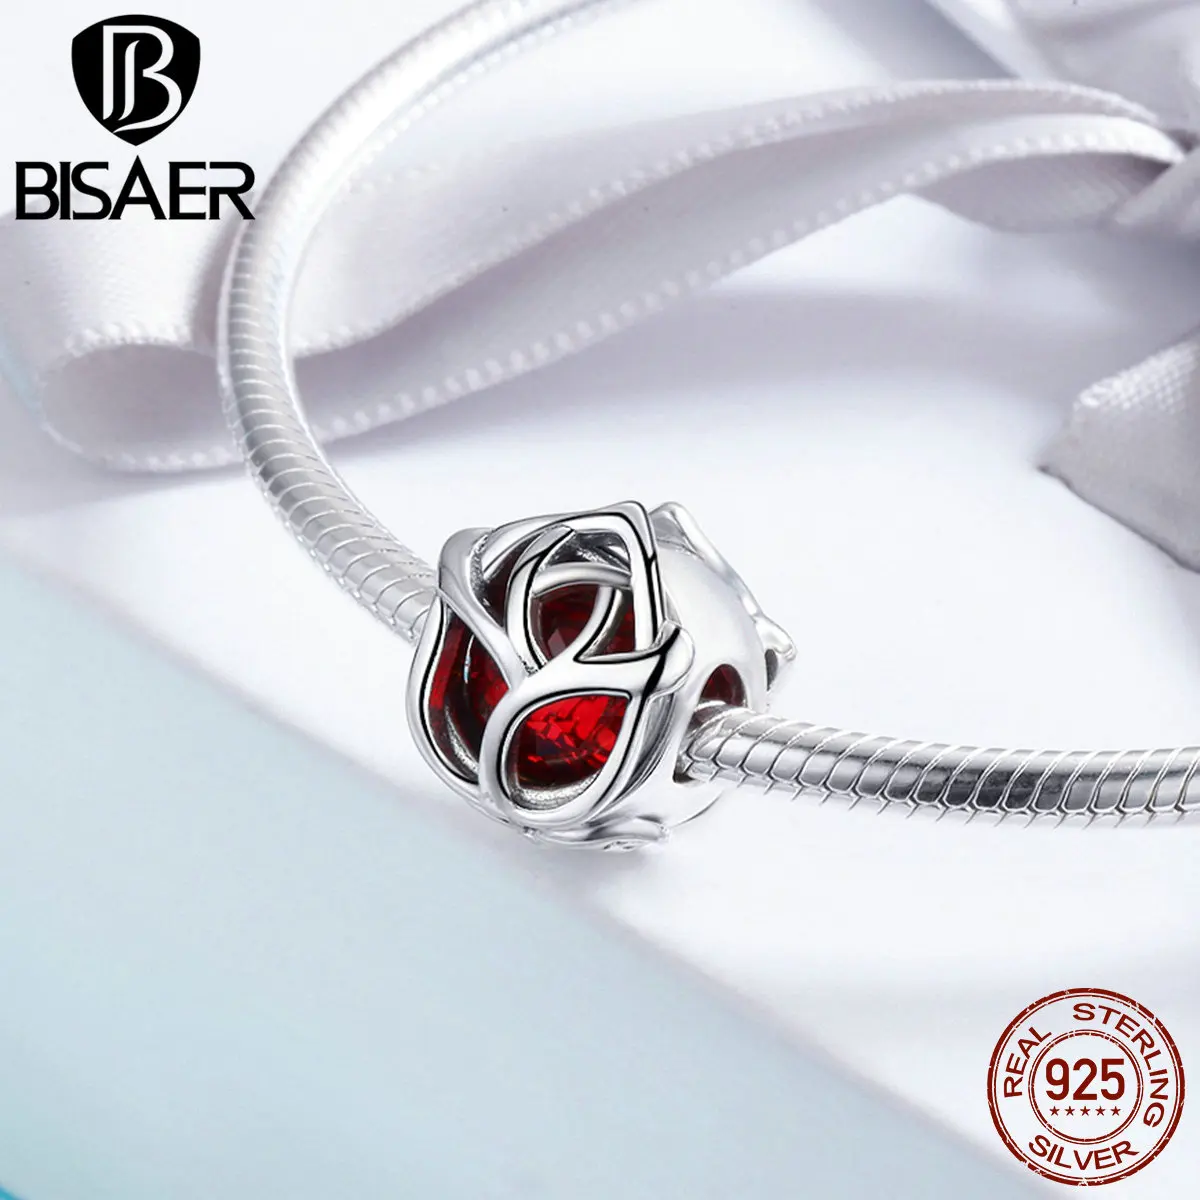 Online BISAER 100% 925 Sterling Silber Perles Romantische Rote Rose Blume Form Charme Perlen fit Charme Armband 925 Silber Schmuck GXC568